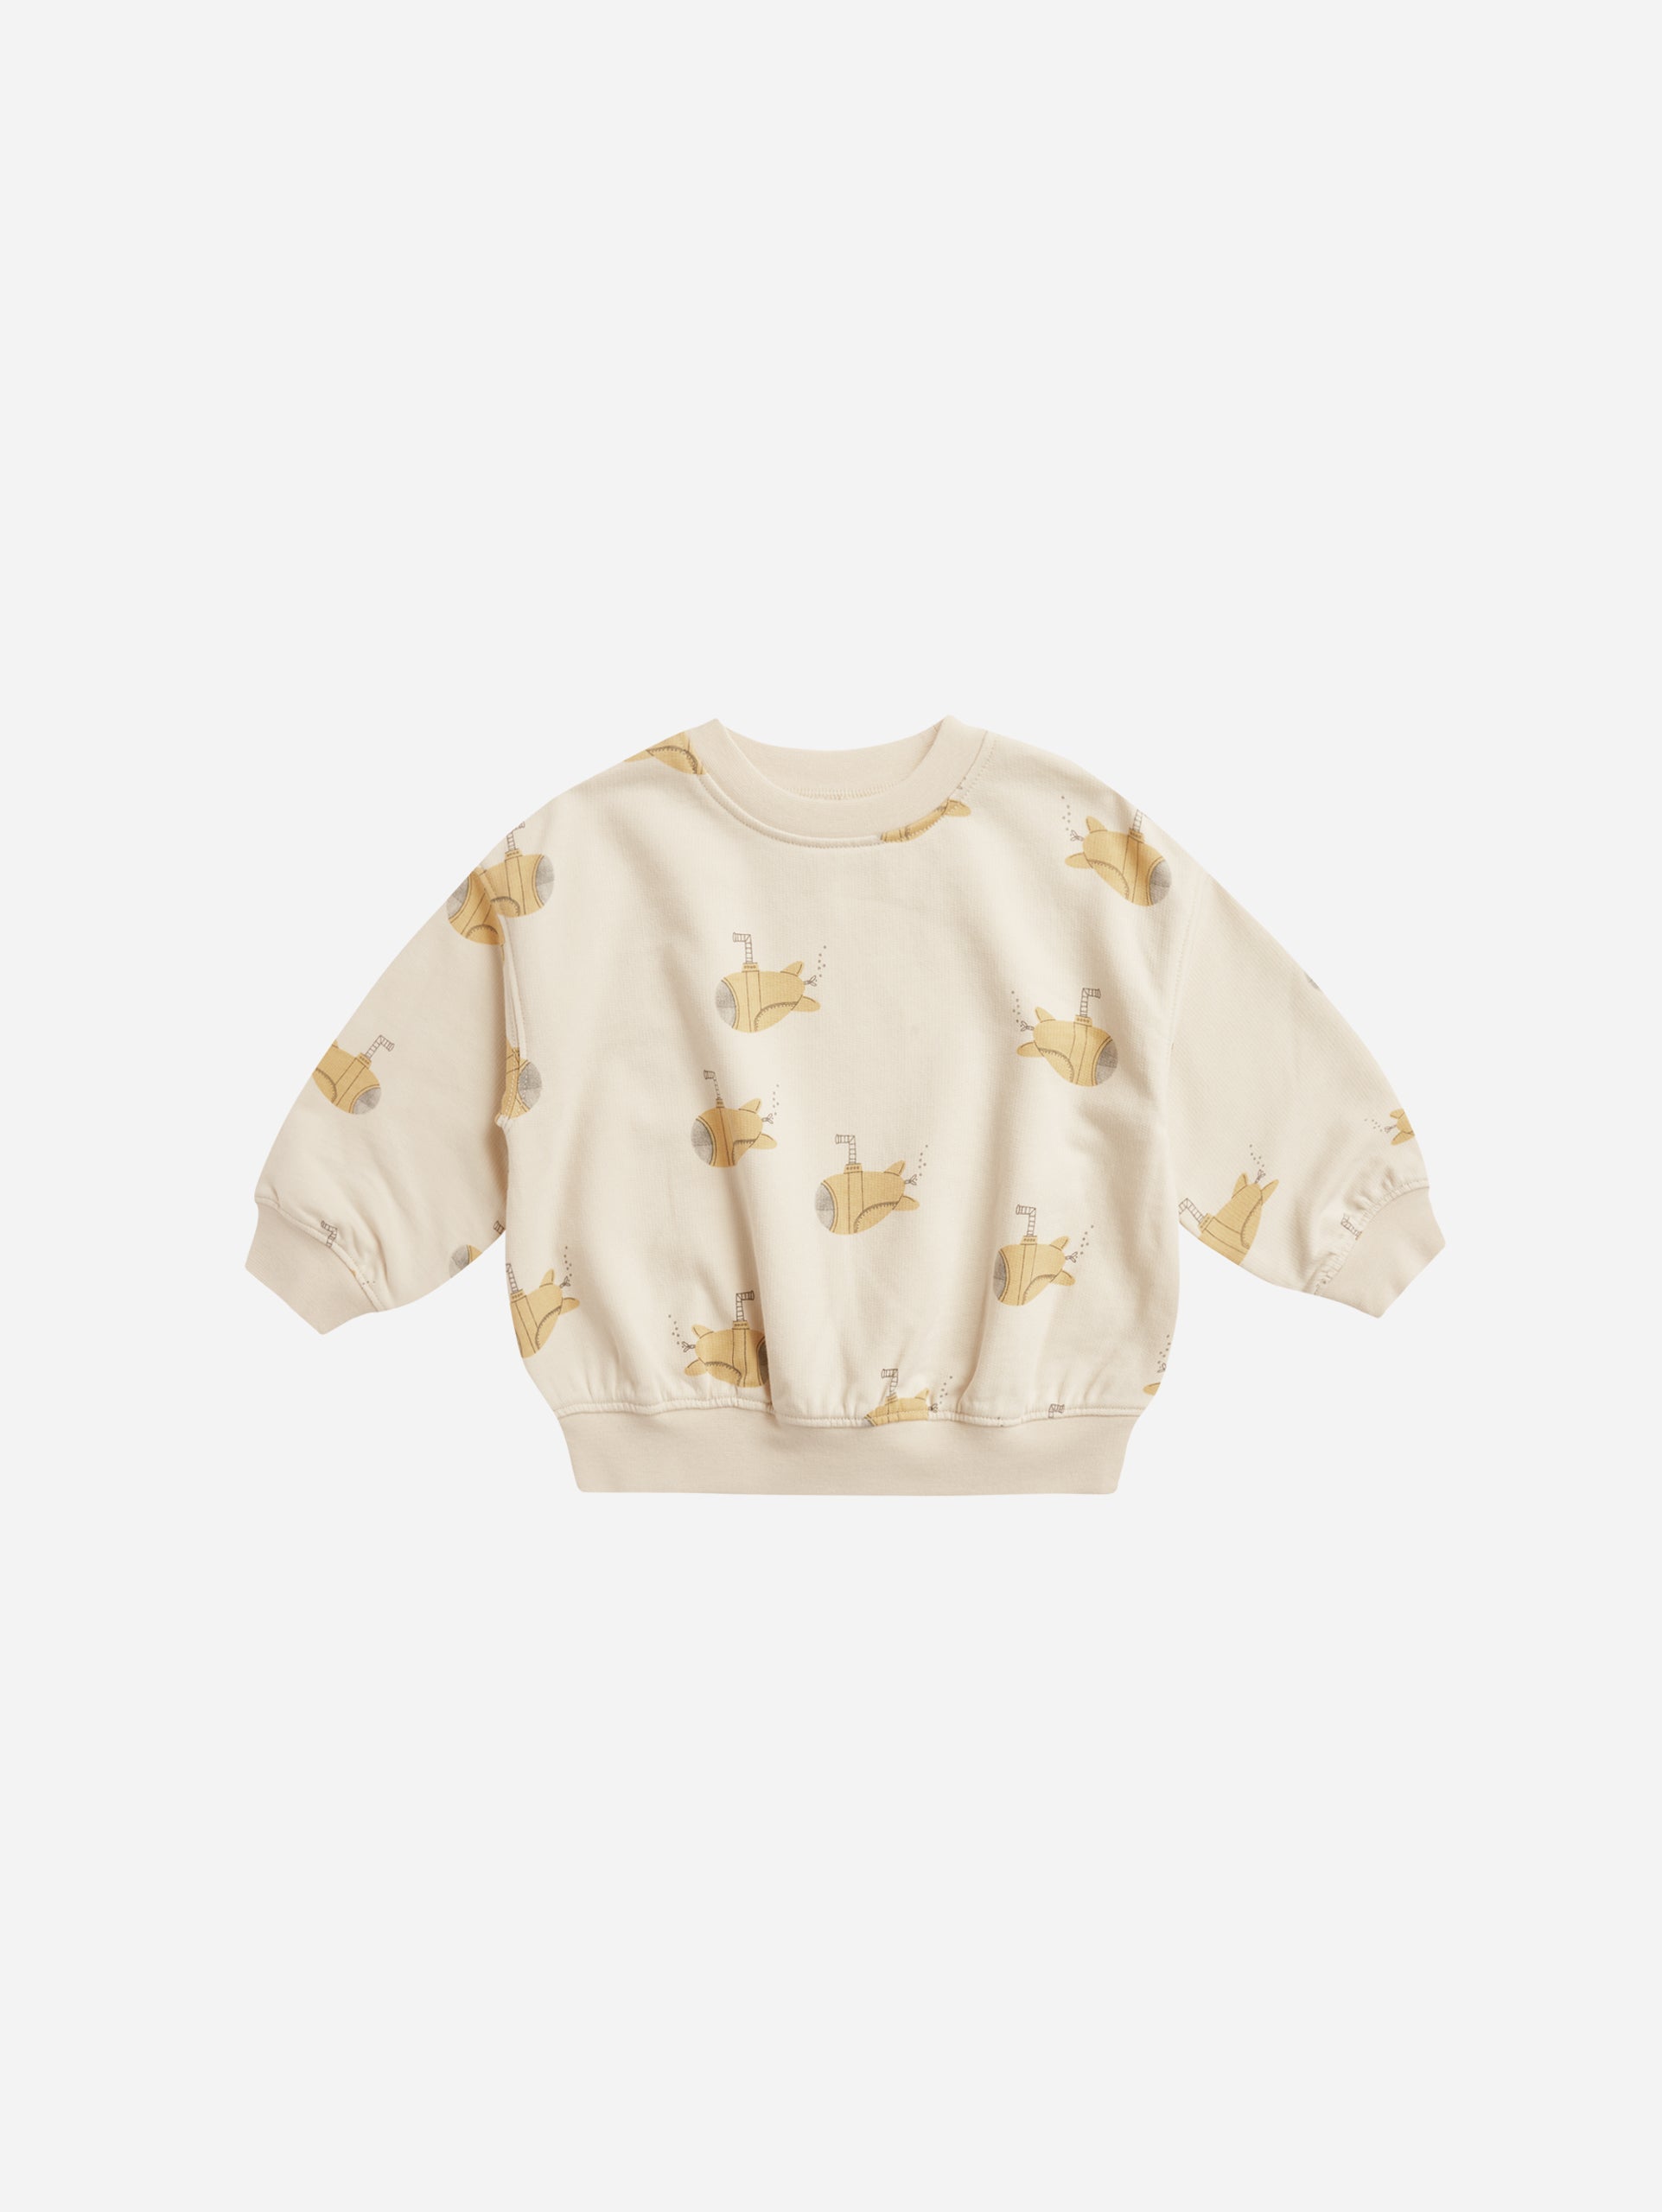 Sweatshirt || Submarine - Rylee + Cru | Kids Clothes | Trendy Baby Clothes | Modern Infant Outfits |